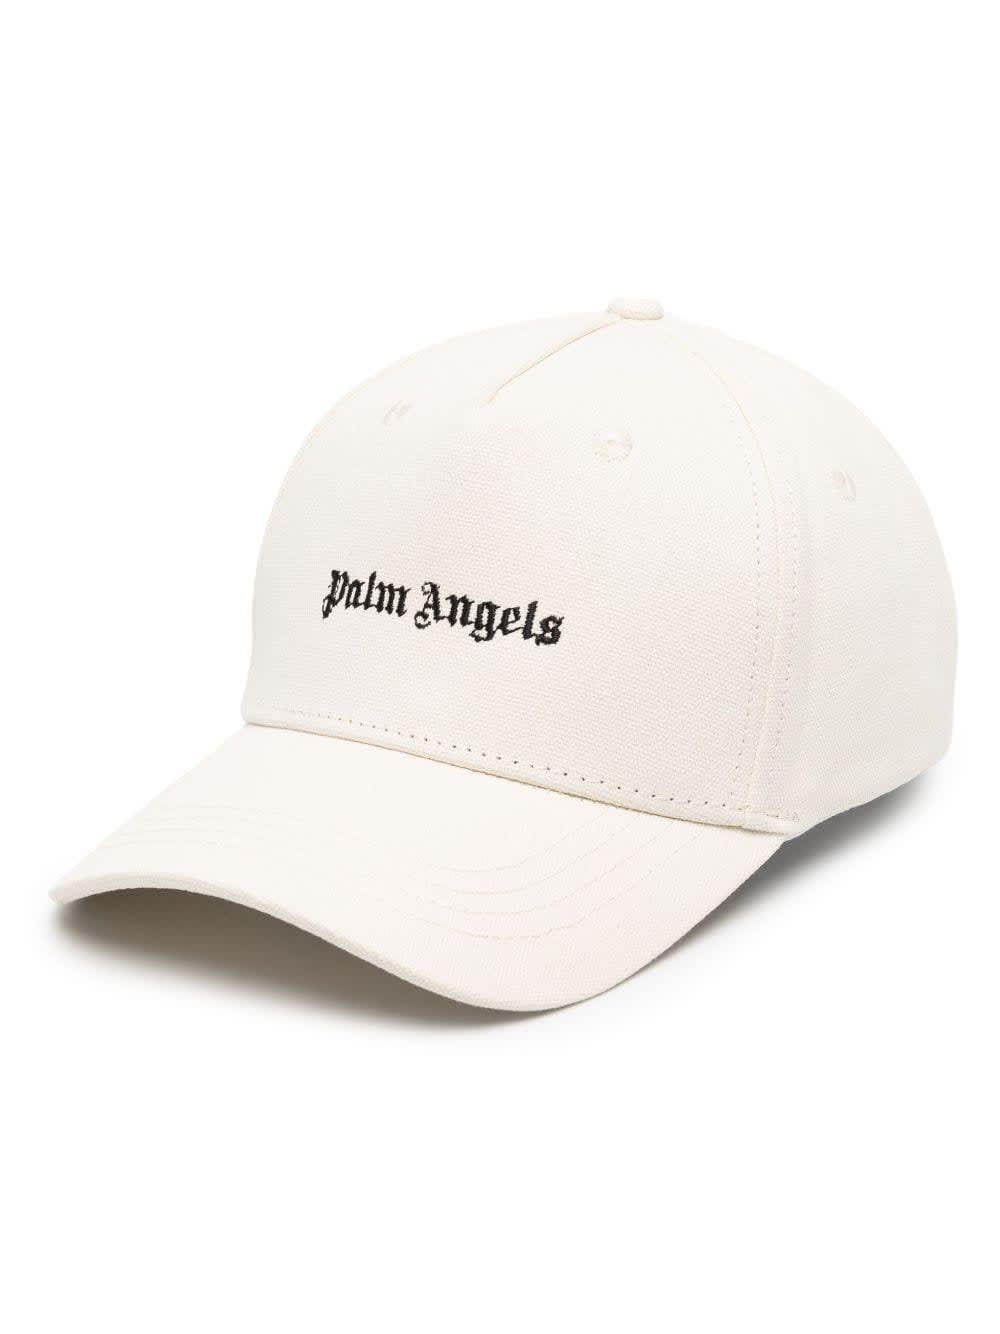 Palm Angels White Baseball Hat With Logo